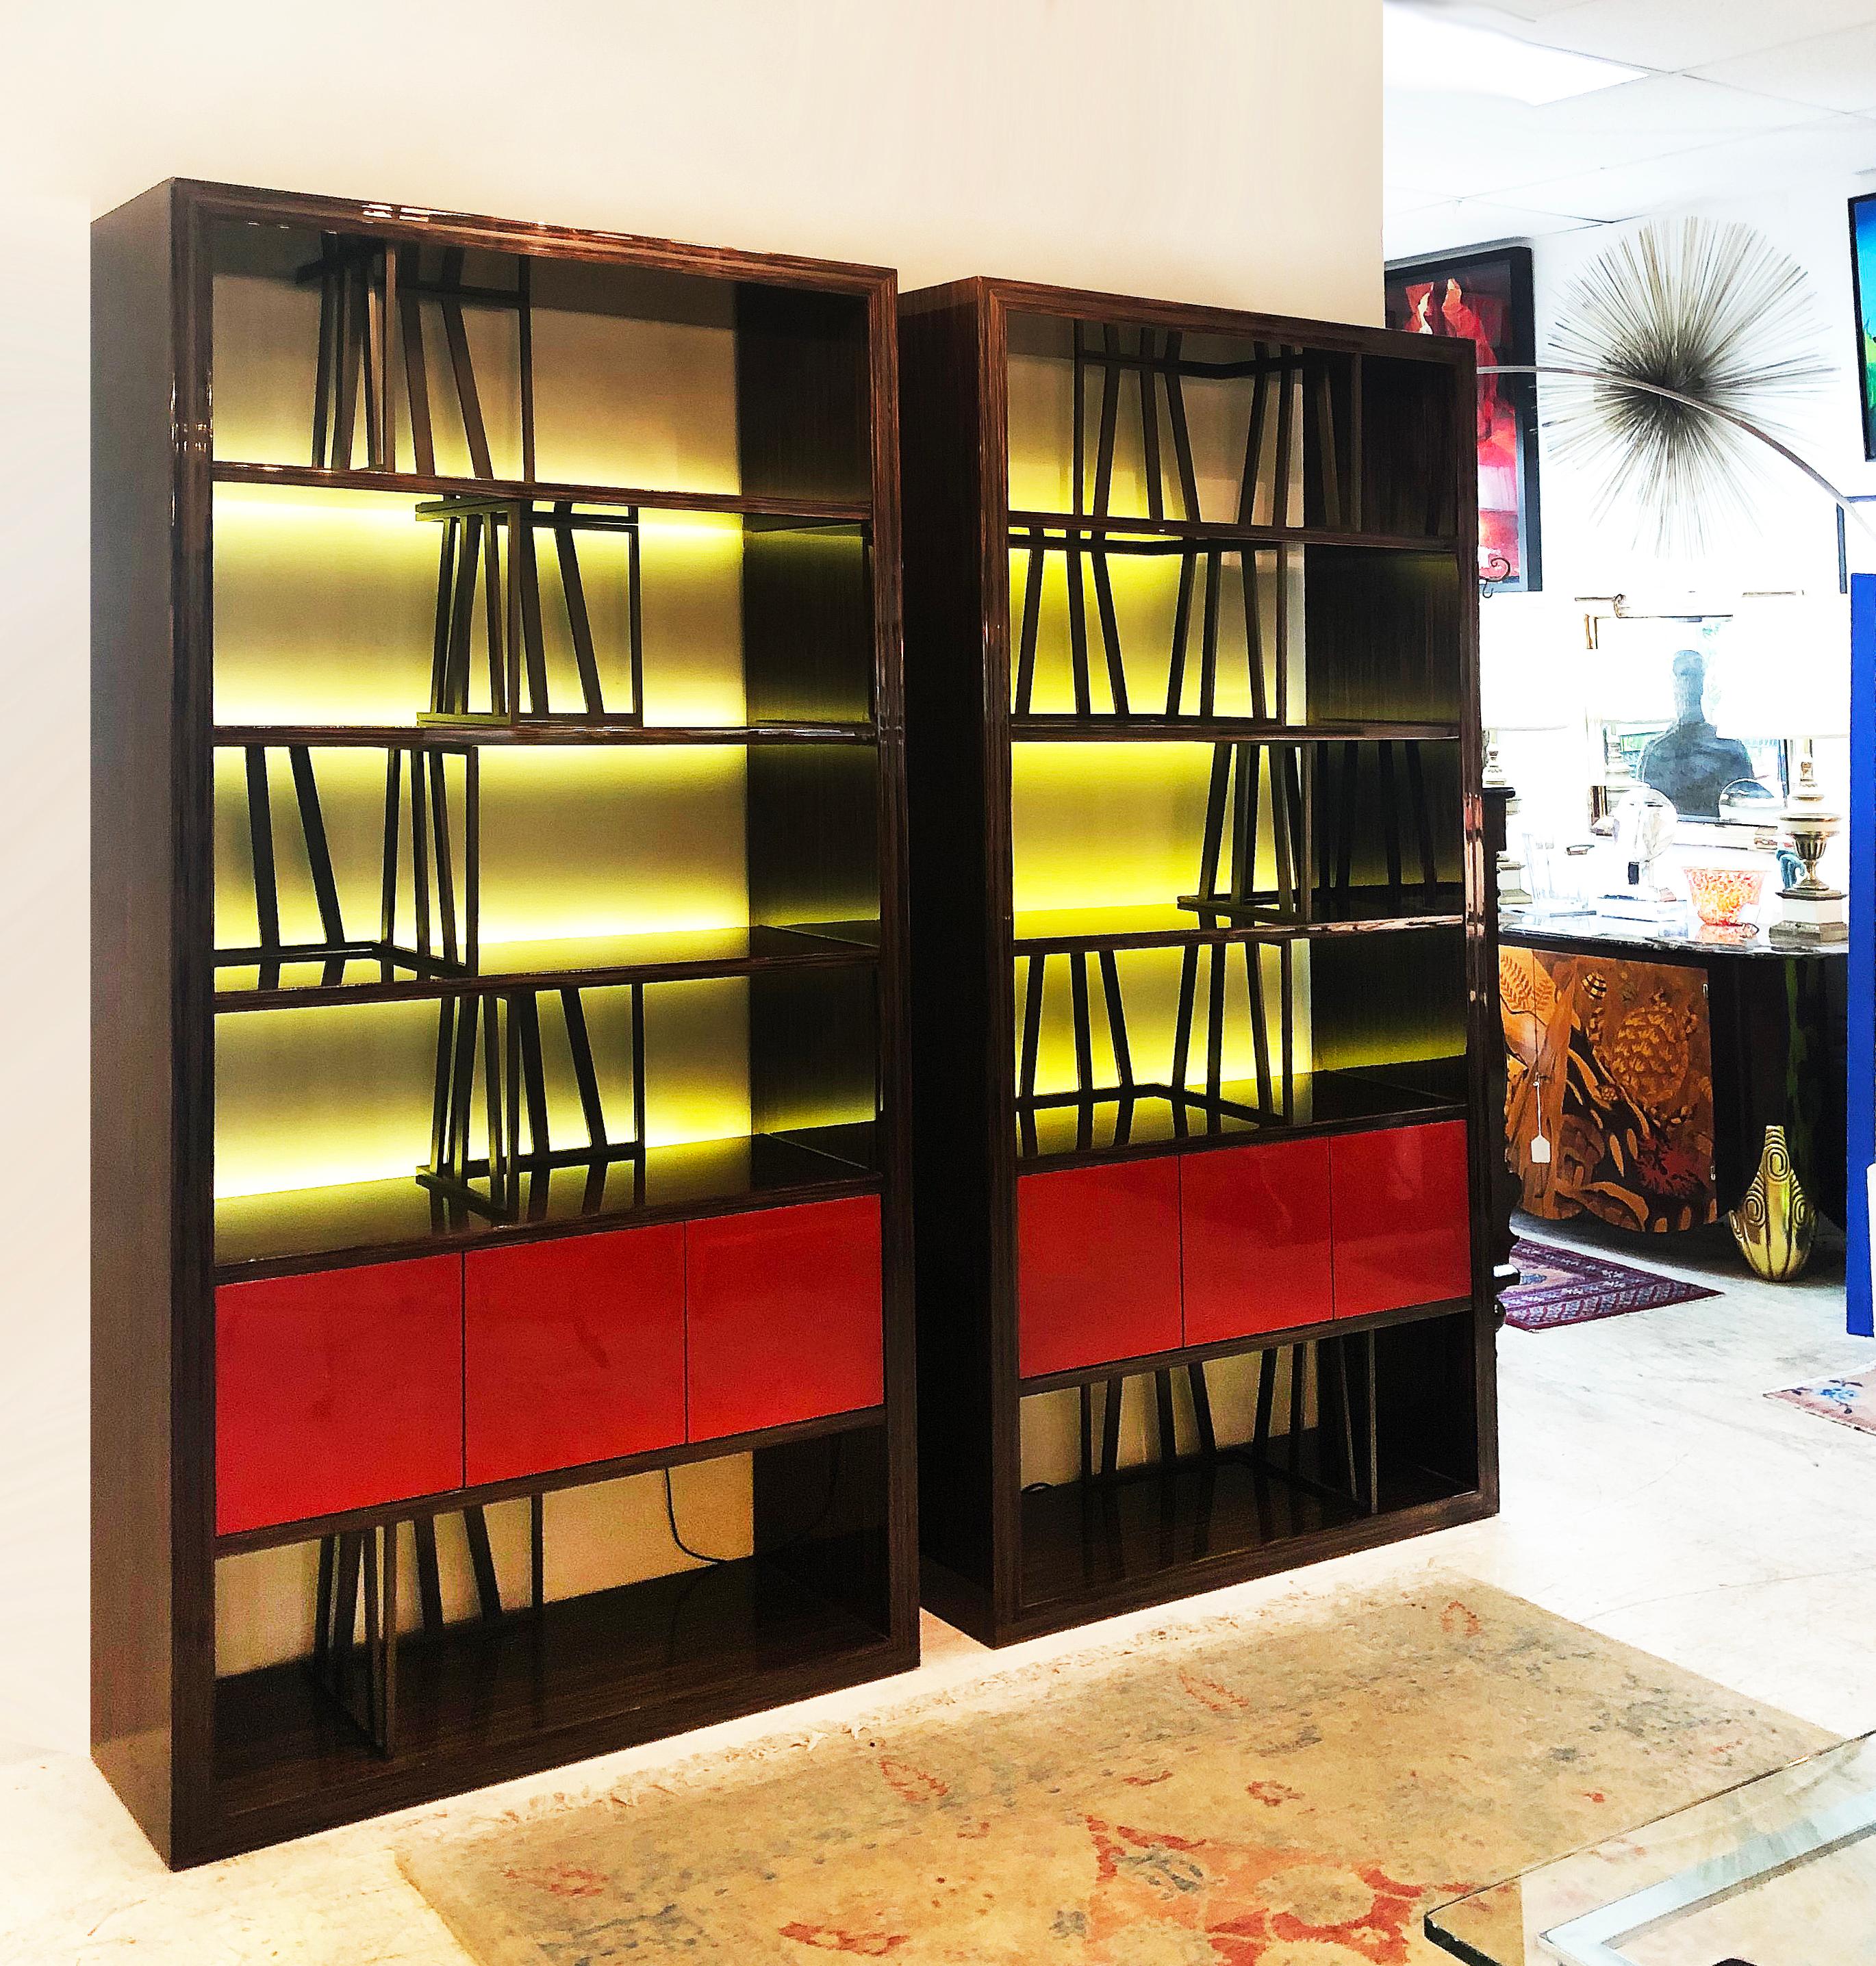 Christian Liaigre Macassar ebony bookcases/room divider, pair

Offered for sale is a pair of Christian Liaige Macassar, ebony, and lacquered wood bookcases or room dividers. The bookcases are open in the back and finished on all sides so they can